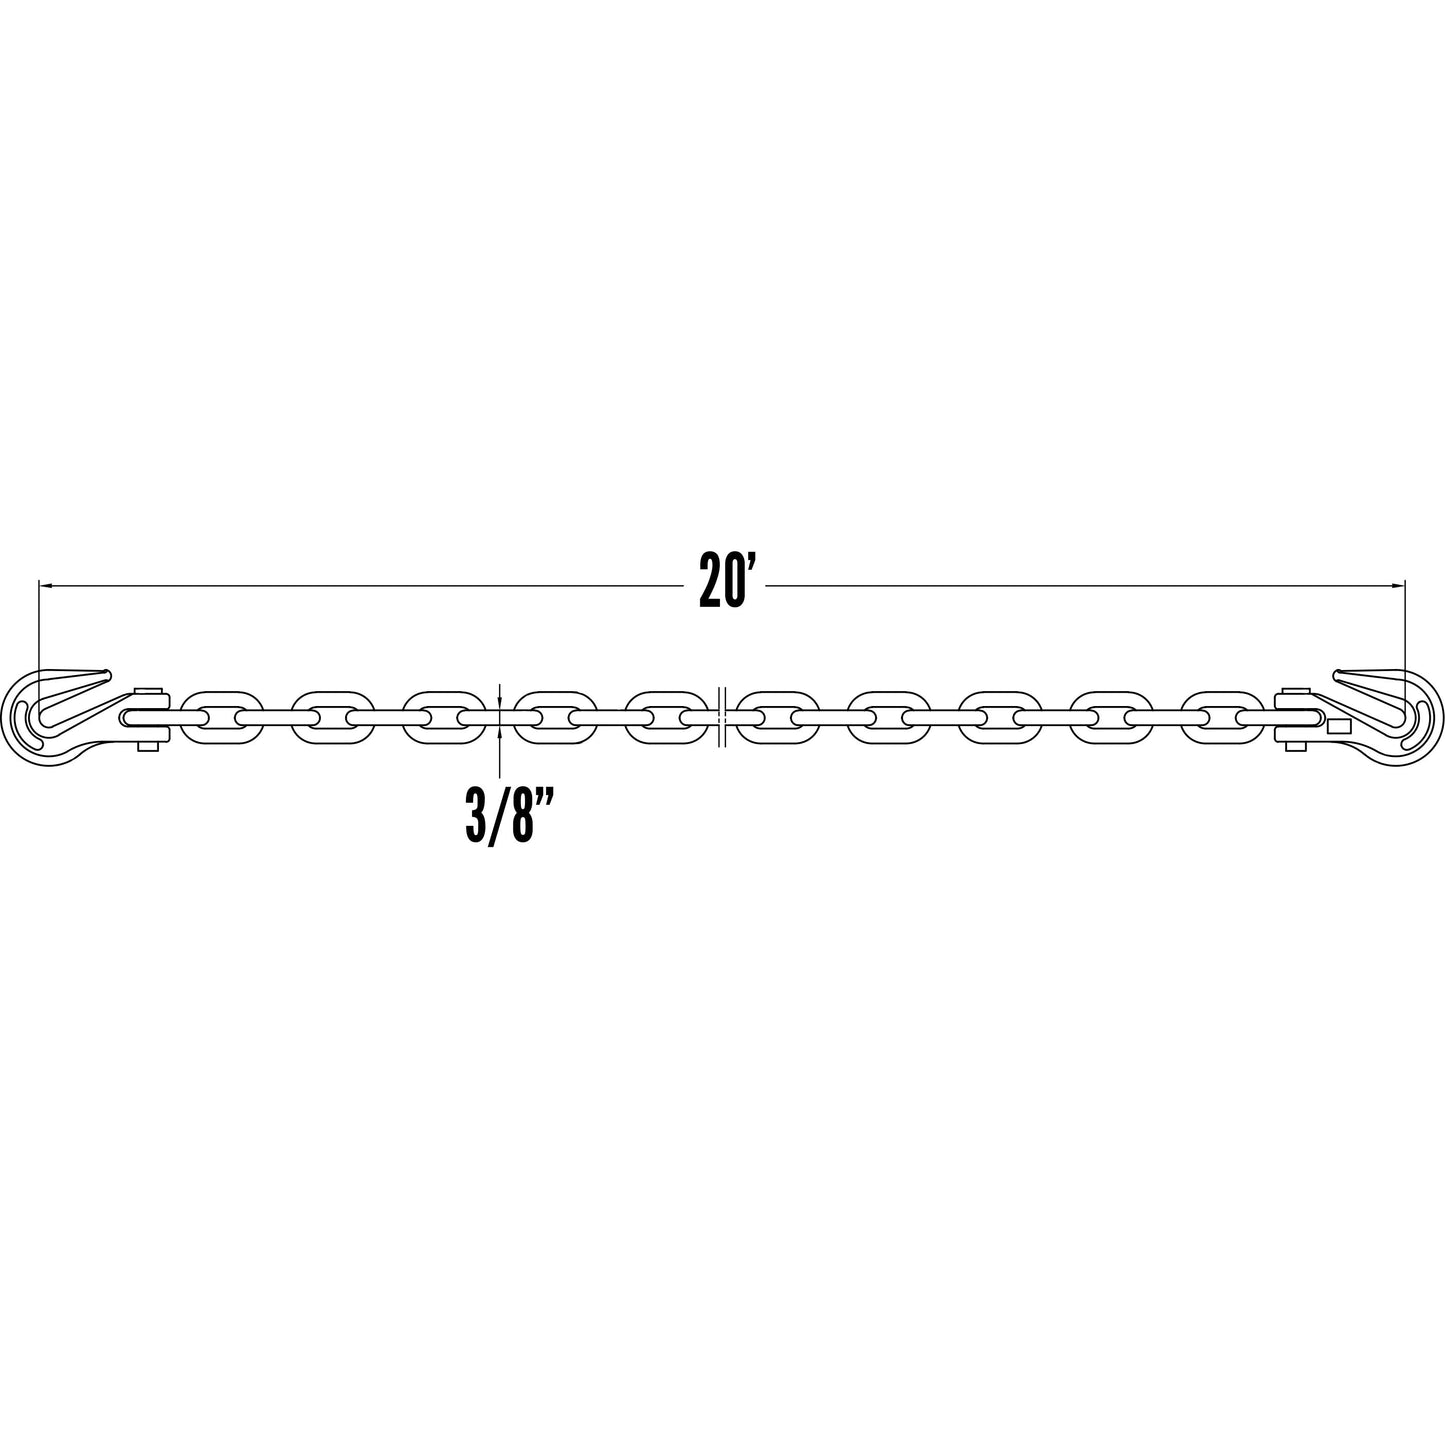 38 inch x 20 foot Transport Chain Grade 70 image 4 of 8